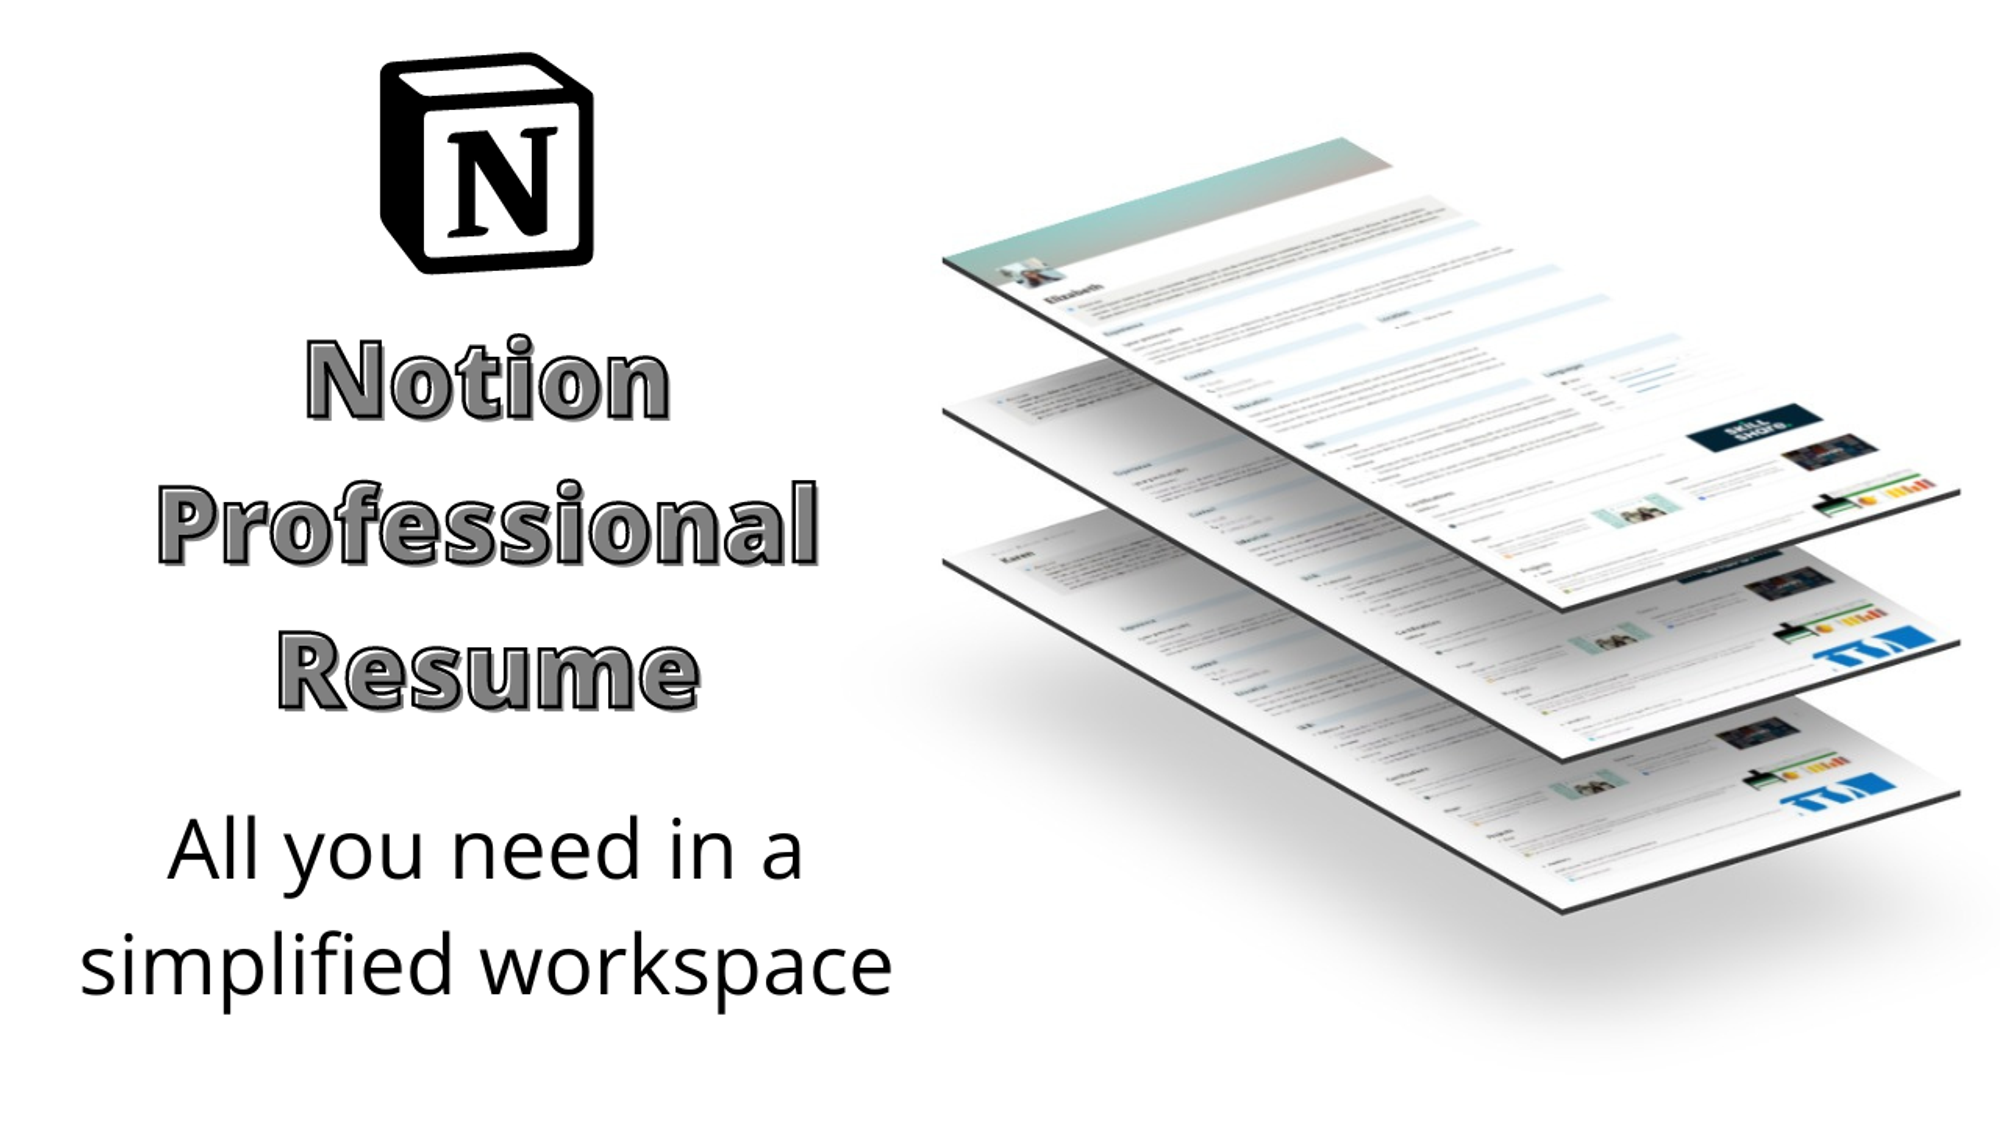 Notion Professional Resume.png